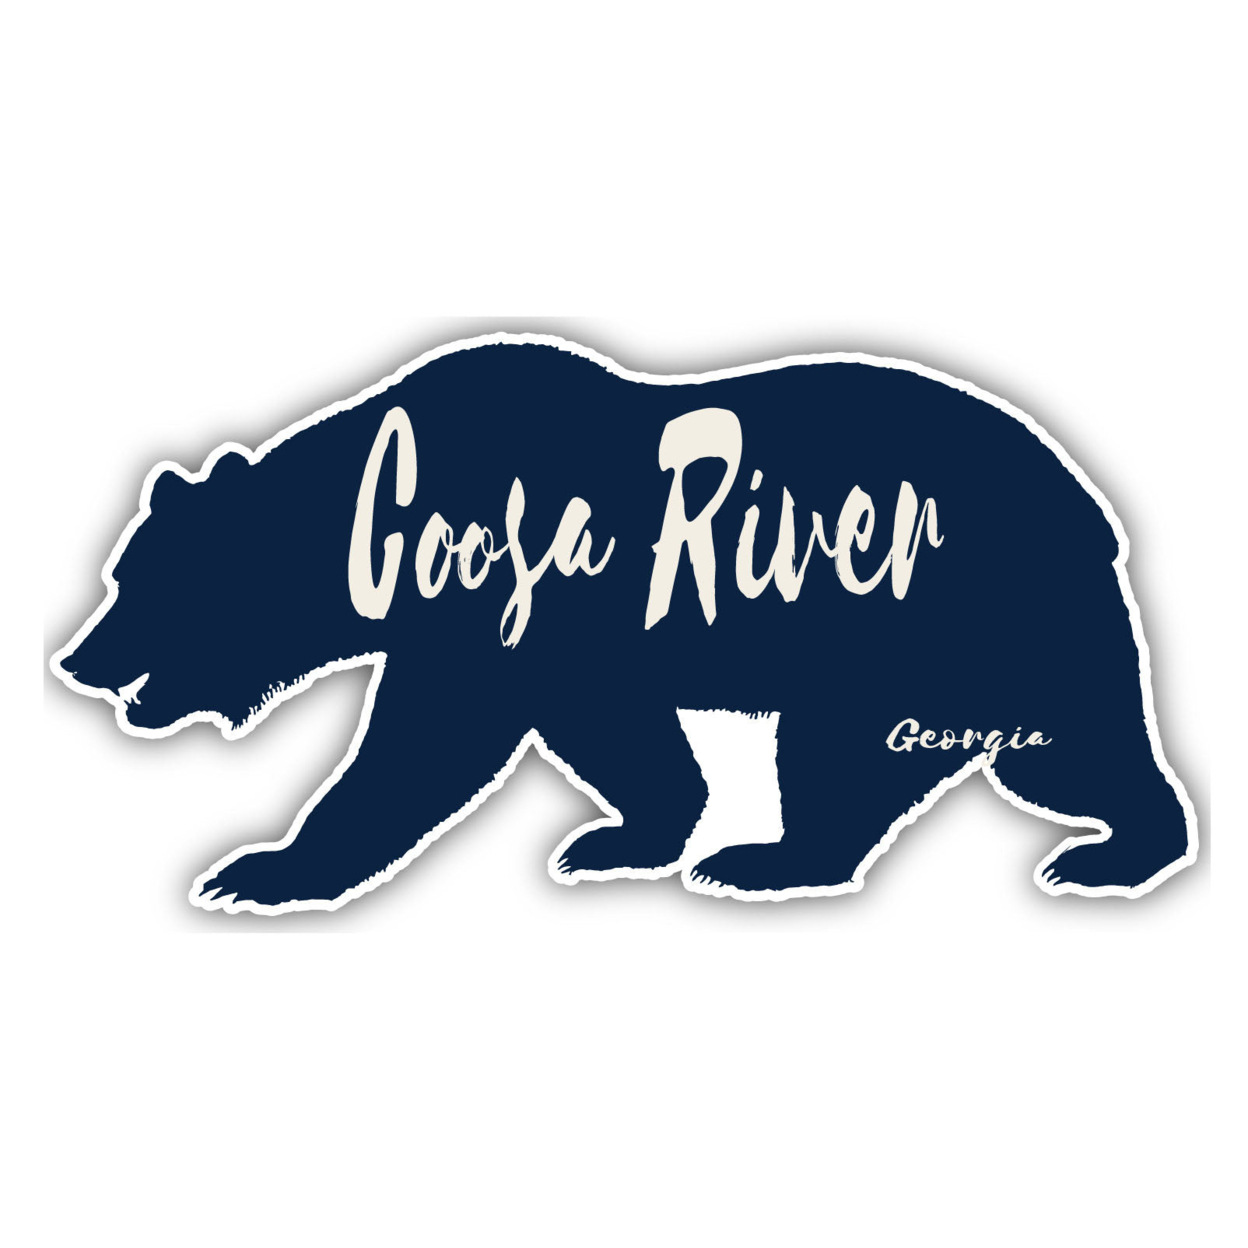 Coosa River Georgia Souvenir Decorative Stickers (Choose Theme And Size) - 4-Pack, 12-Inch, Bear